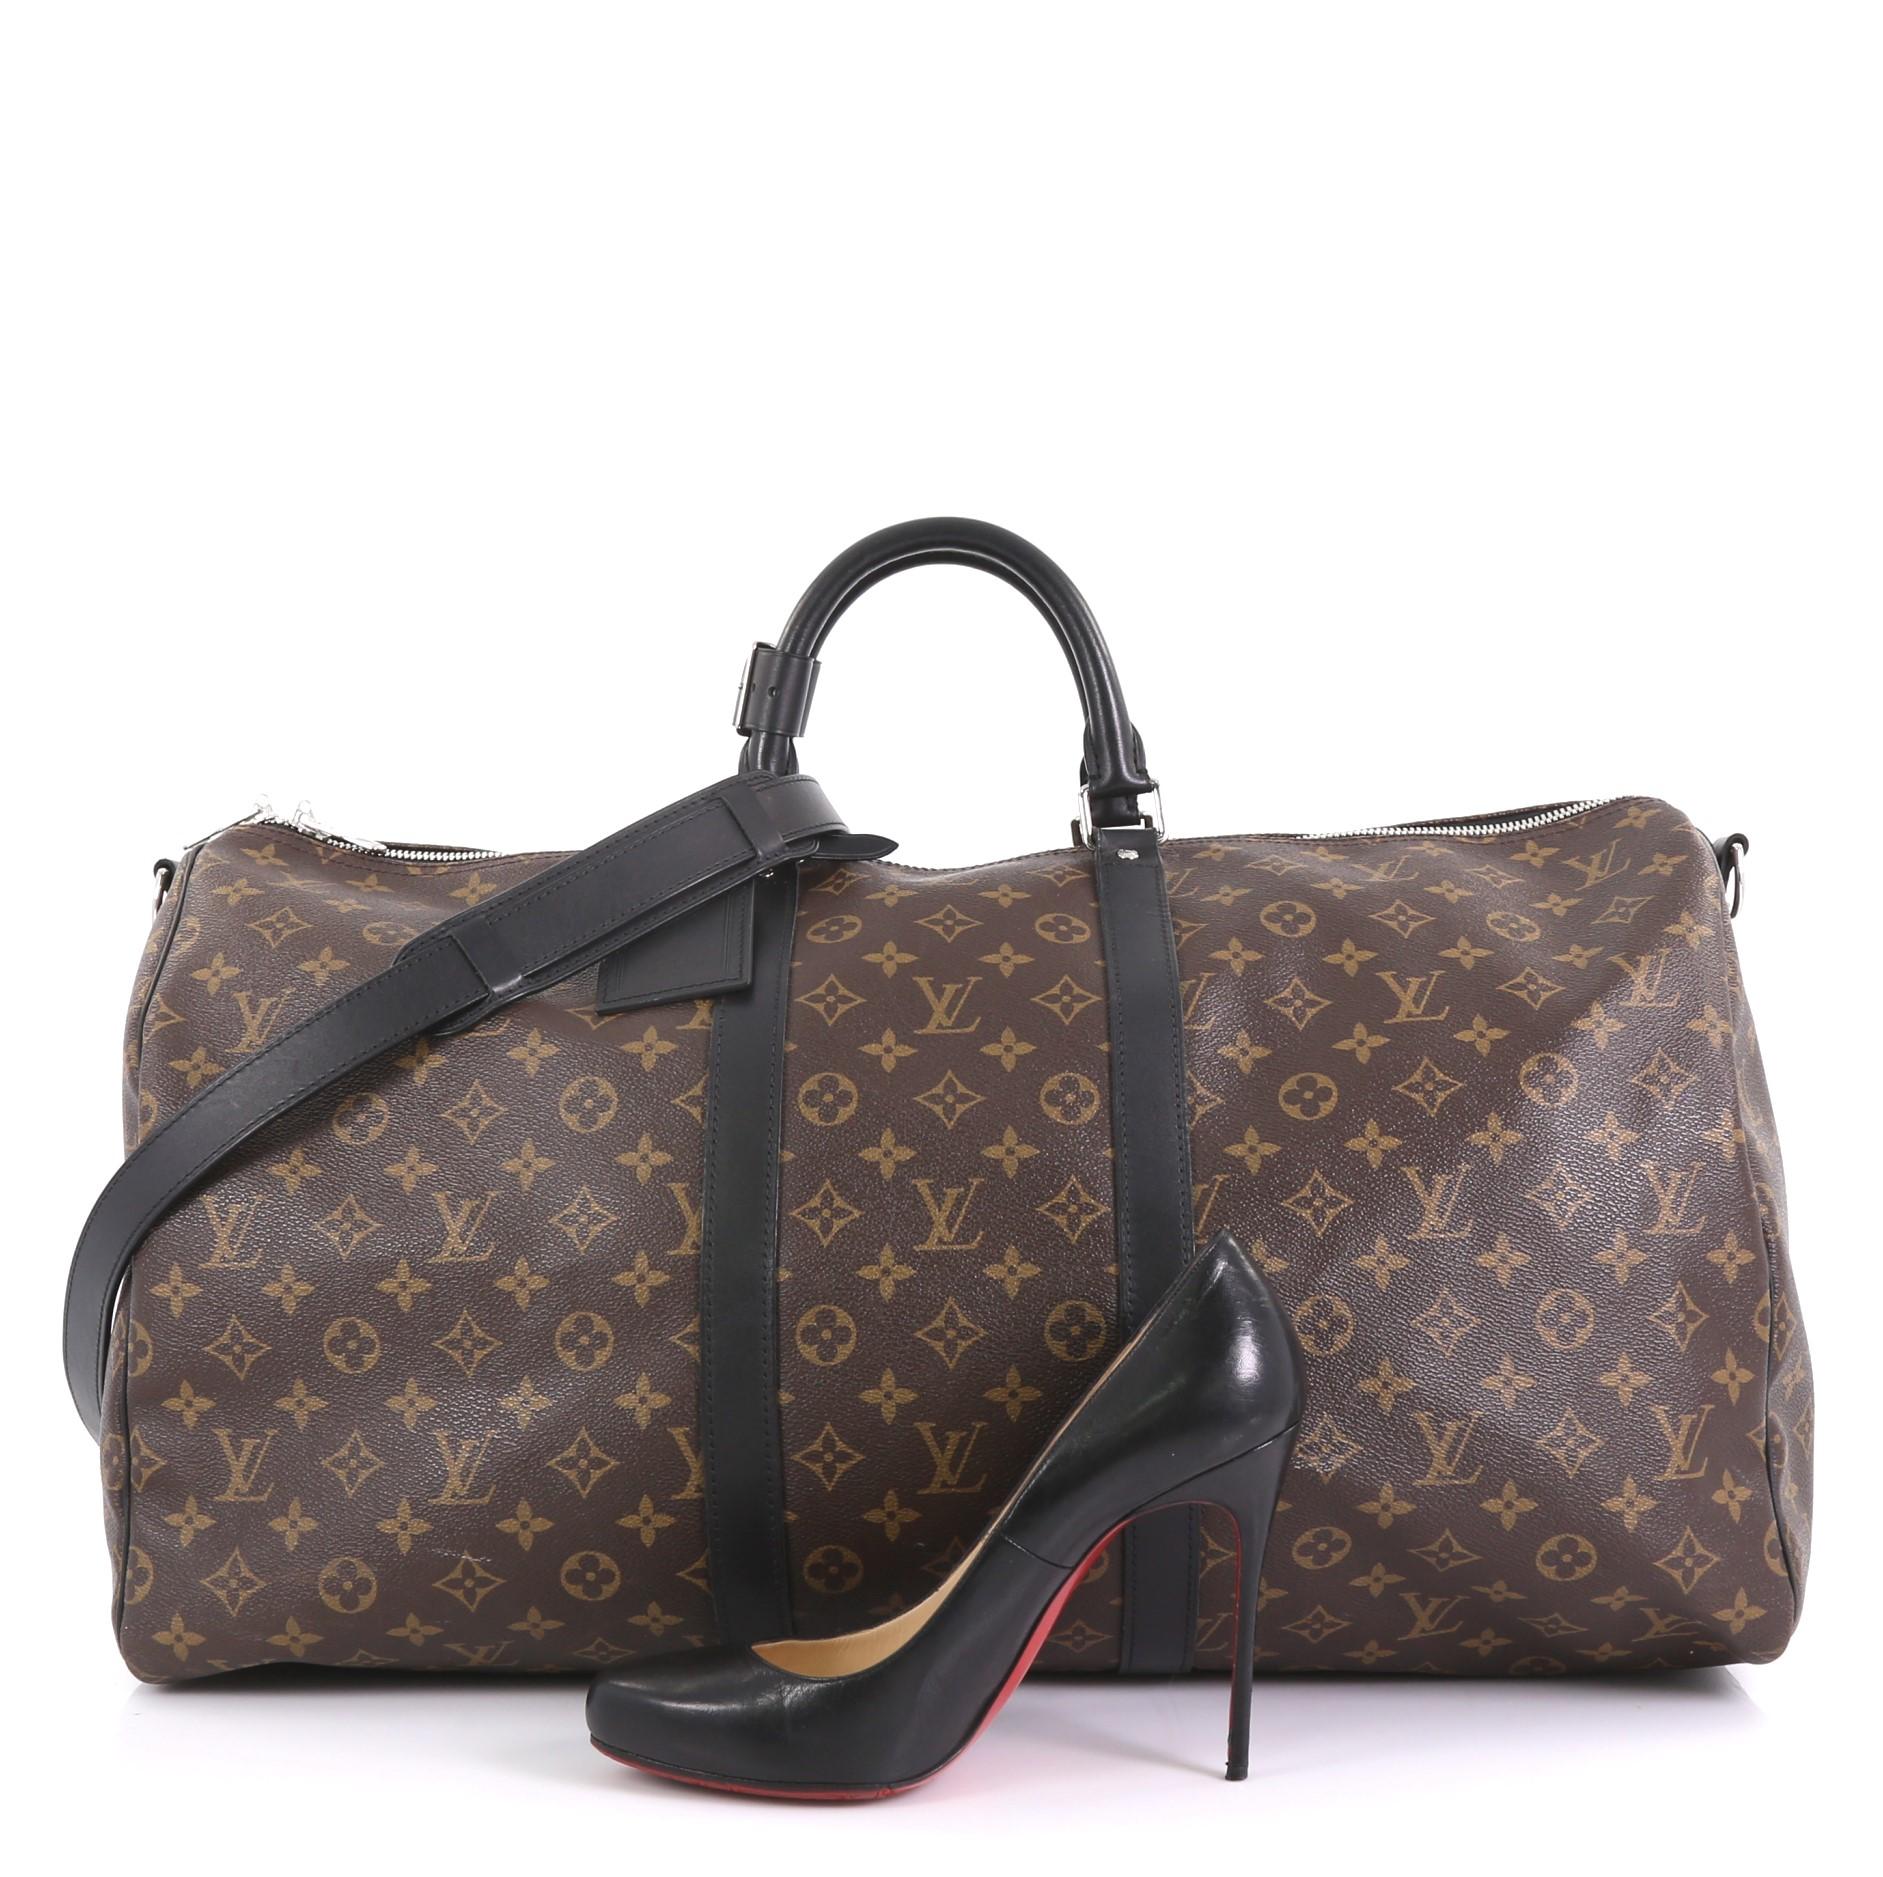 This Louis Vuitton Keepall Bandouliere Bag Macassar Monogram Canvas 55, crafted in brown macassar monogram coated canvas and black leather, features dual rolled leather handles, leather trim, and silver-tone hardware. Its two-way zip closure opens